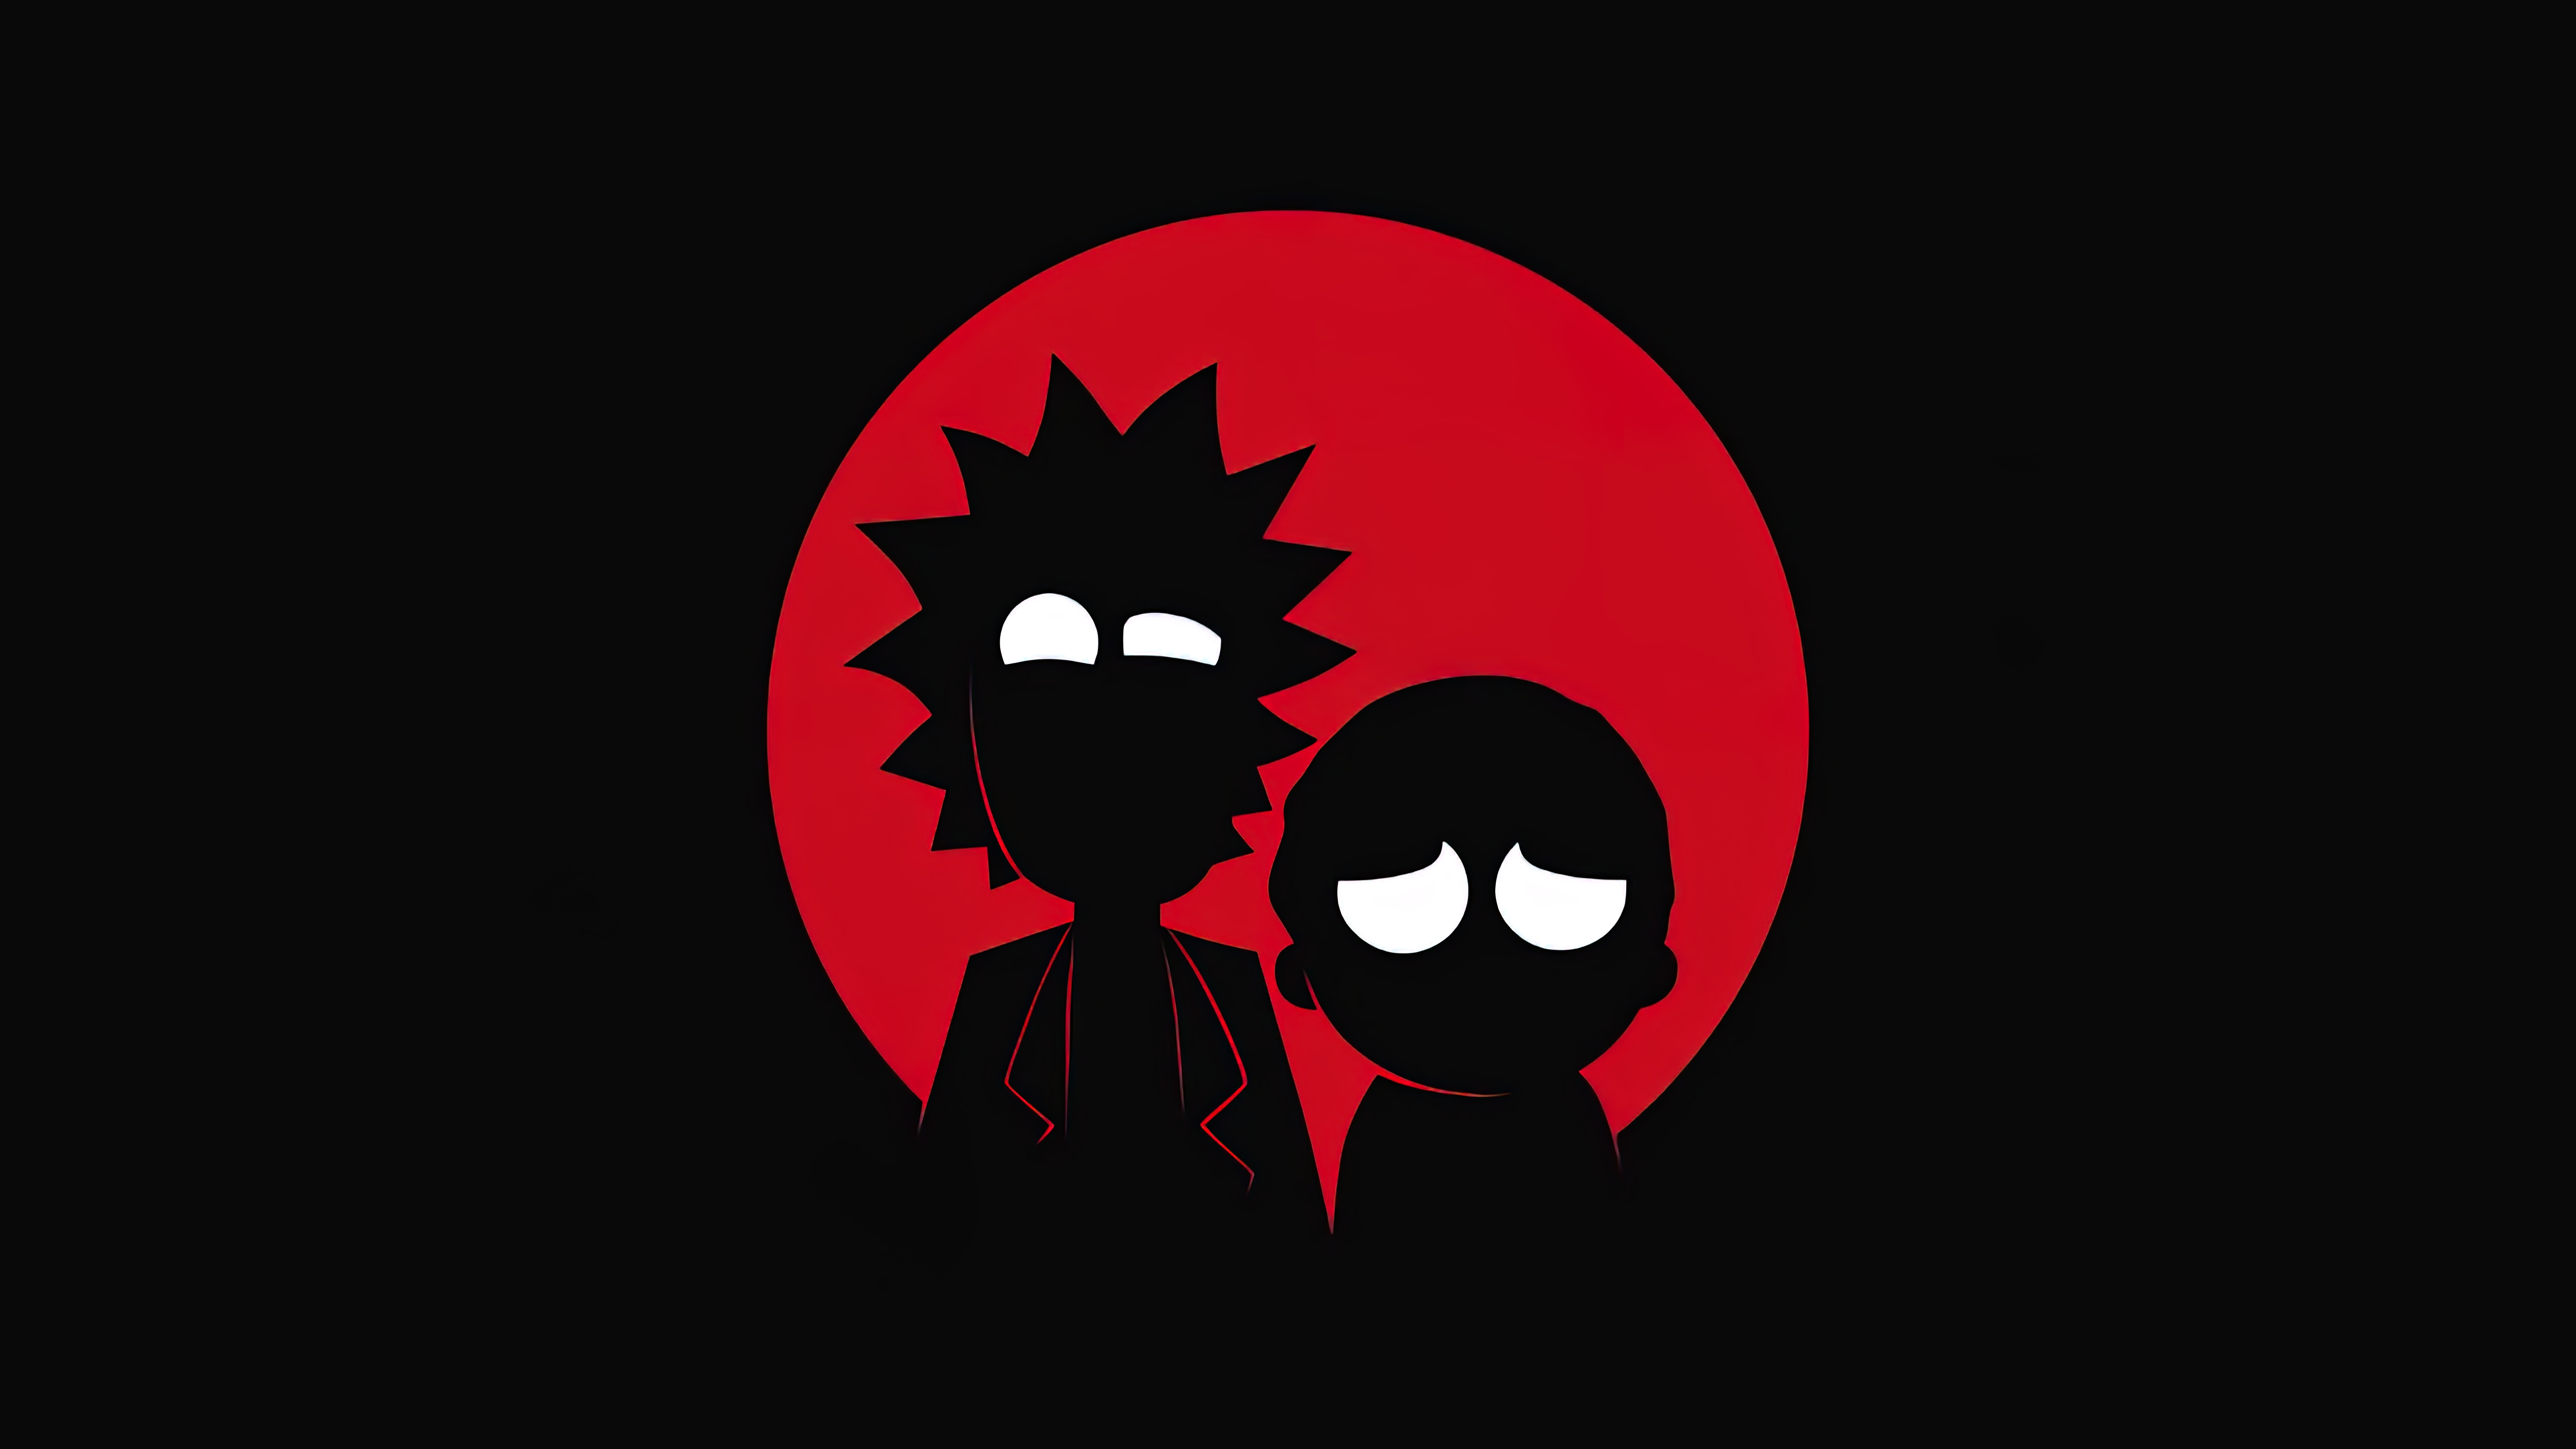 HD wallpaper, Black Background, Morty Smith, Simple, Rick Sanchez, Rick And Morty, Amoled, 5K, Silhouette